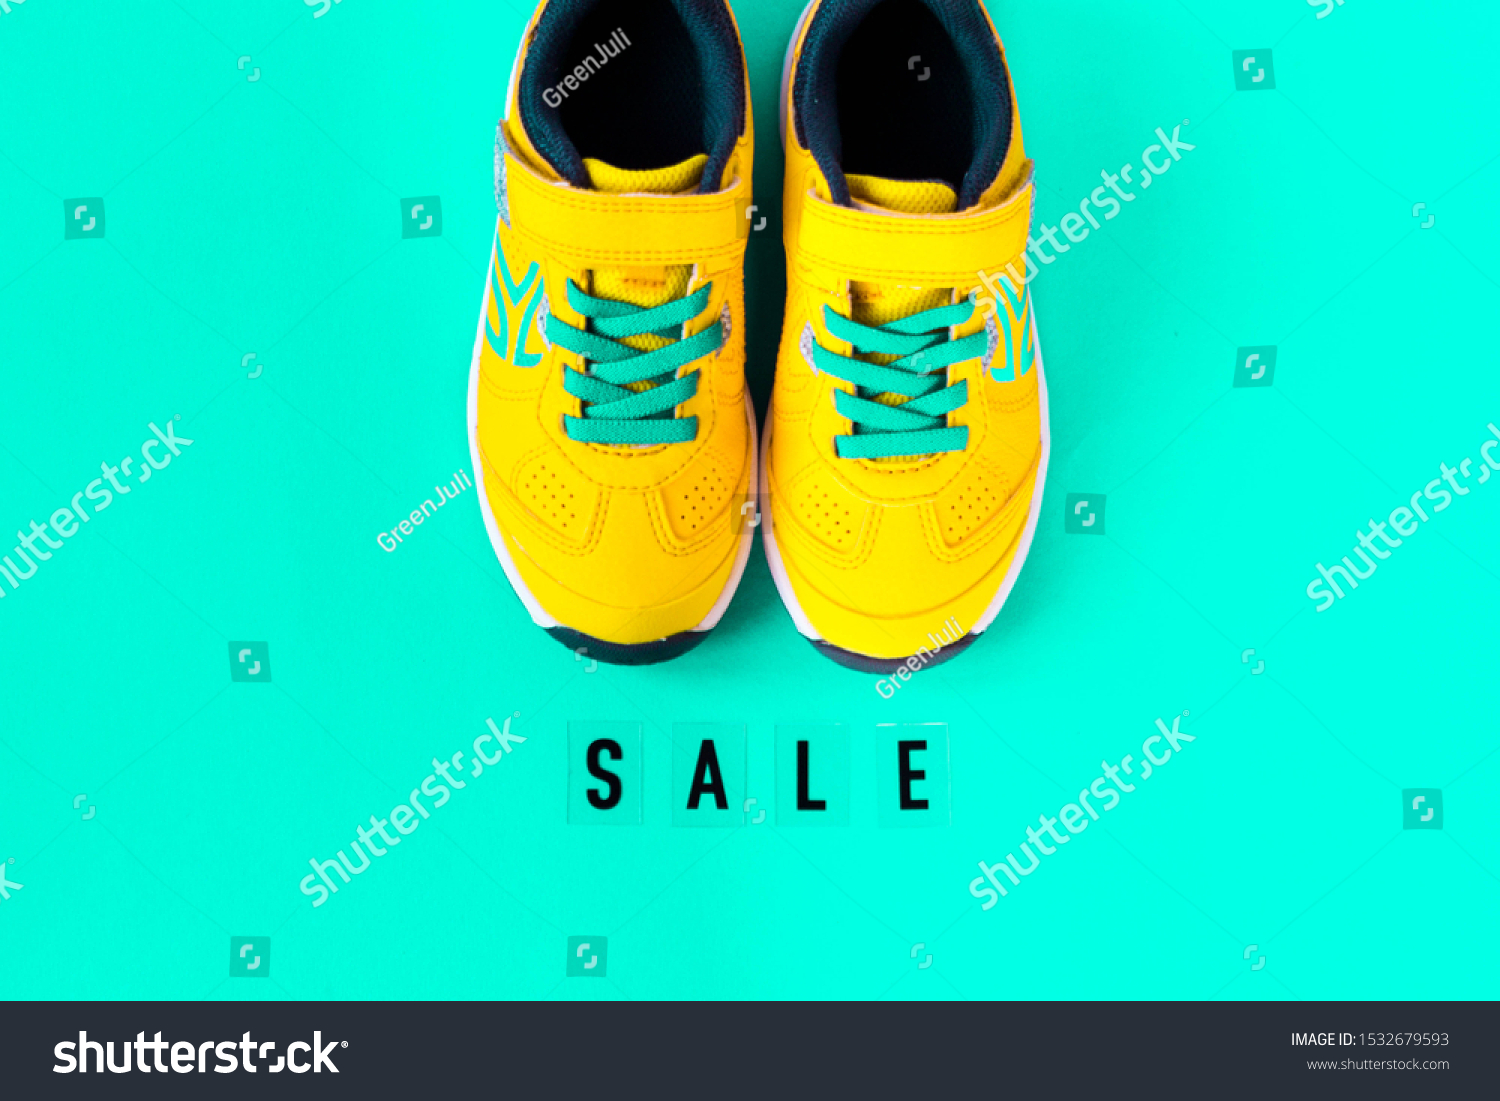 yellow shoes sale